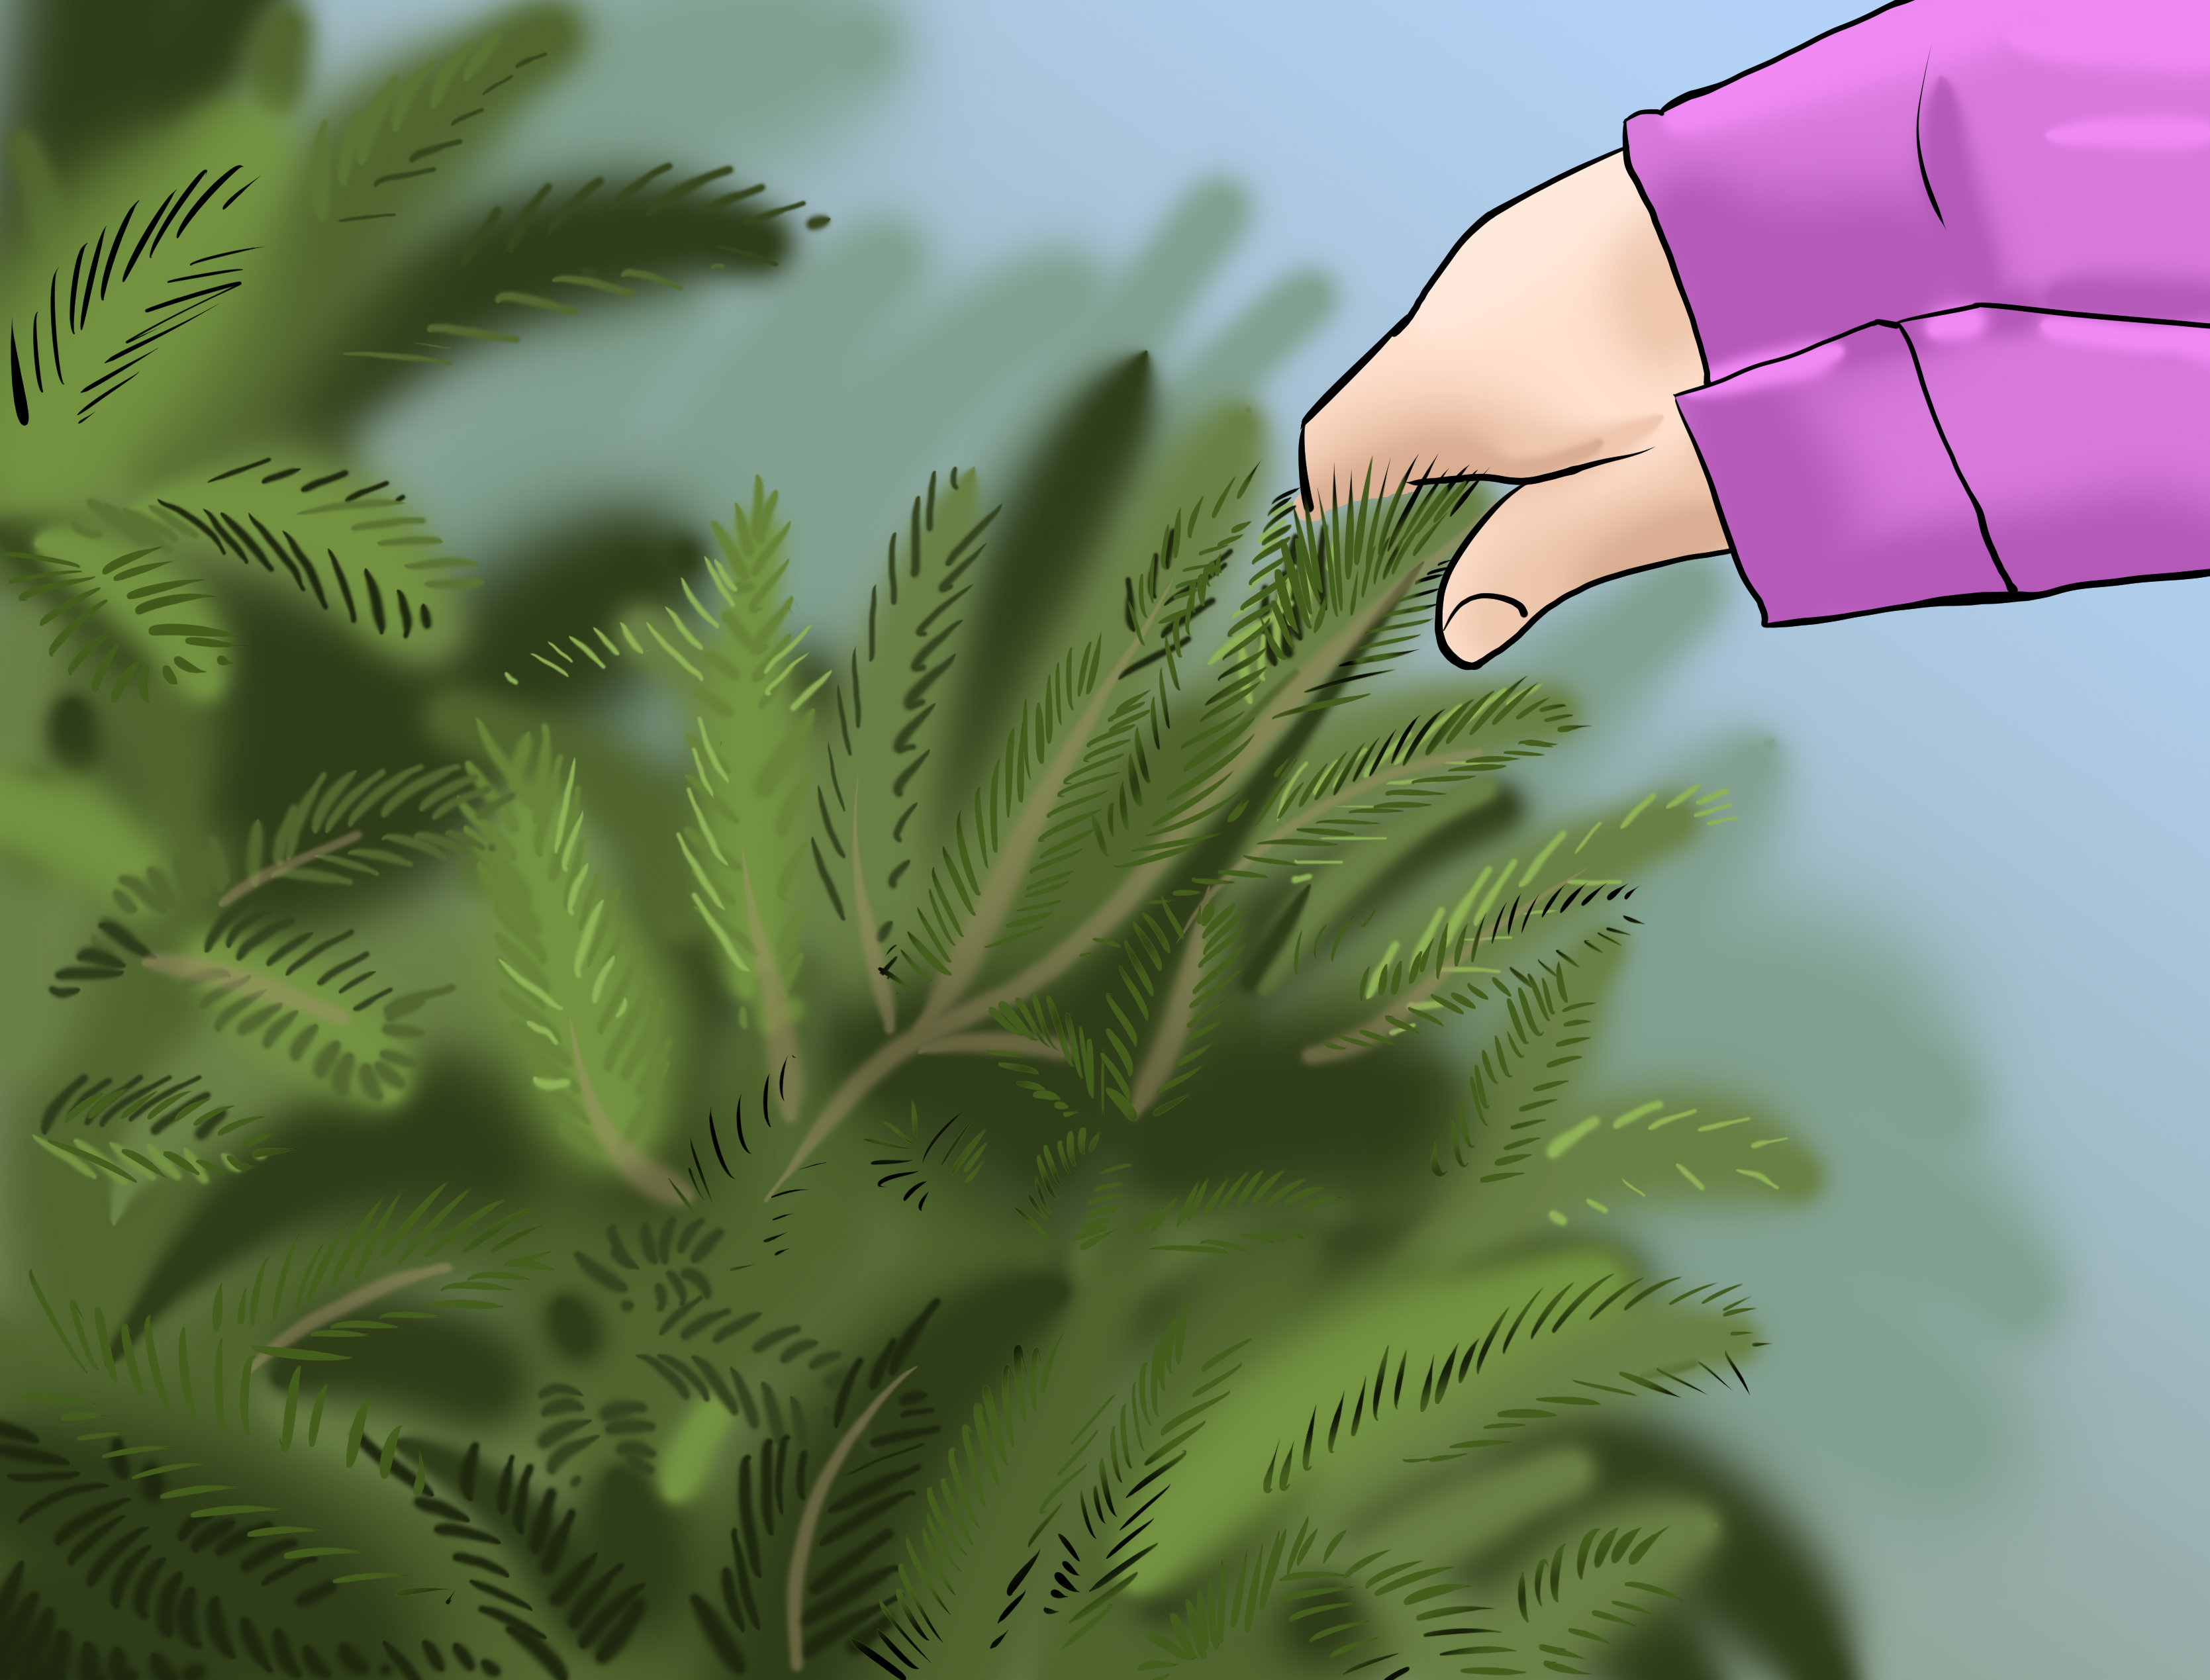 How to Check the Freshness of a Christmas Tree: 4 Steps